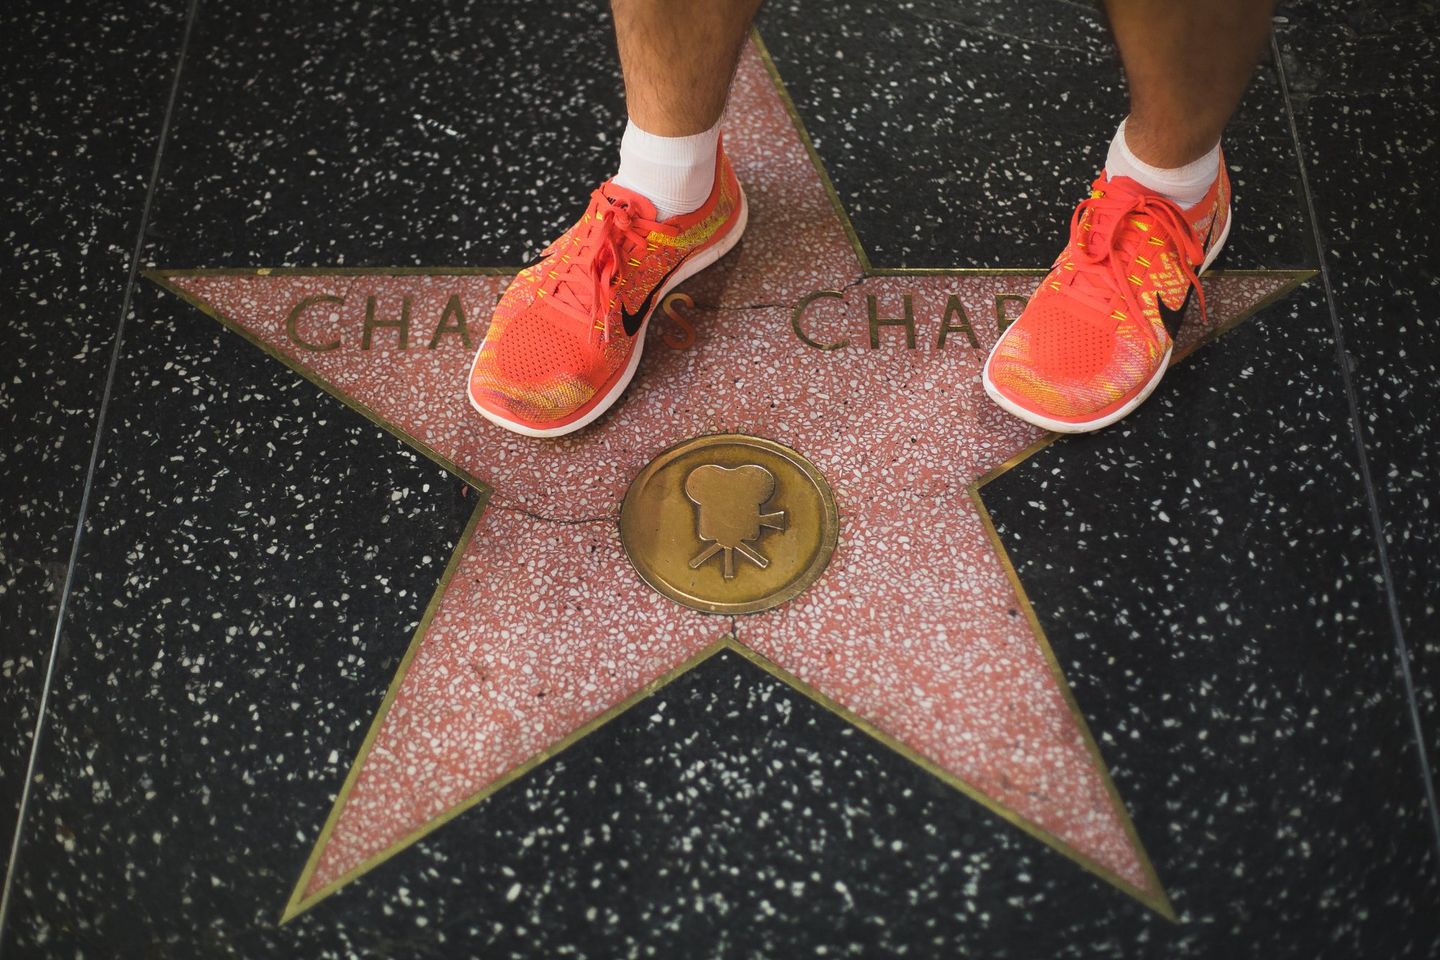 Stunning Stars of Hollywood: A Must-See On the Walk of Fame